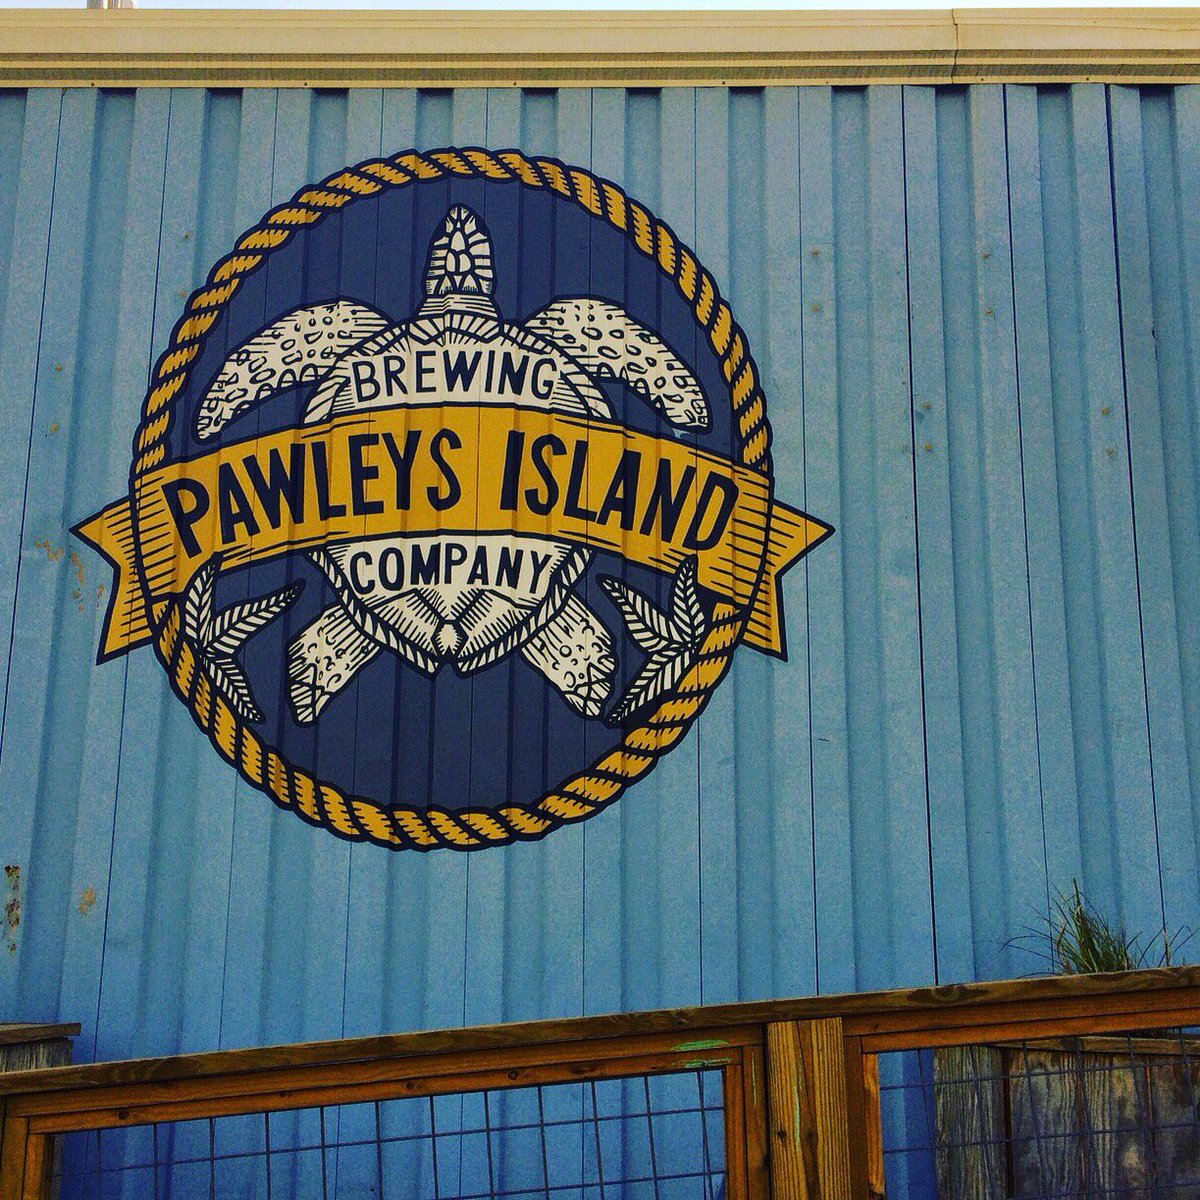 No more speakeasy. Our logo is on the building and it looks awesome. Please stop by and check out what the very talented local artist @jessihelmrichart painted for us. .
.
#craftbeer #brewery #chsbeer #scbeer #pawleysislandbrewing  #charleston #charlestonartist #artist #turtle